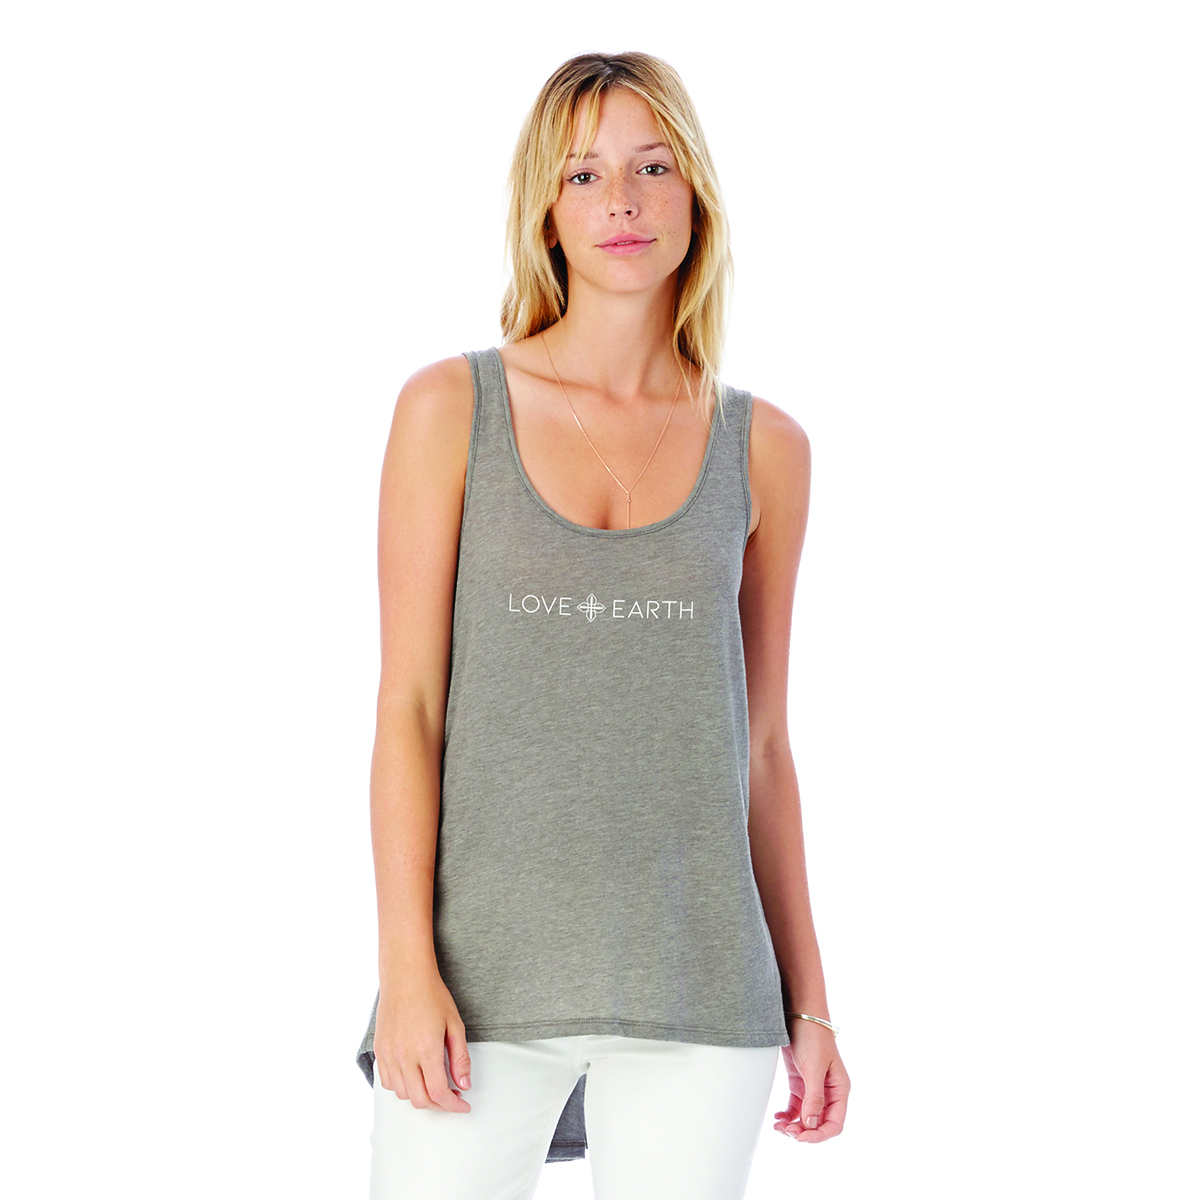 LOVE+EARTH ECO LADIES RELAXED TANK ORGANIC COTTON MIX